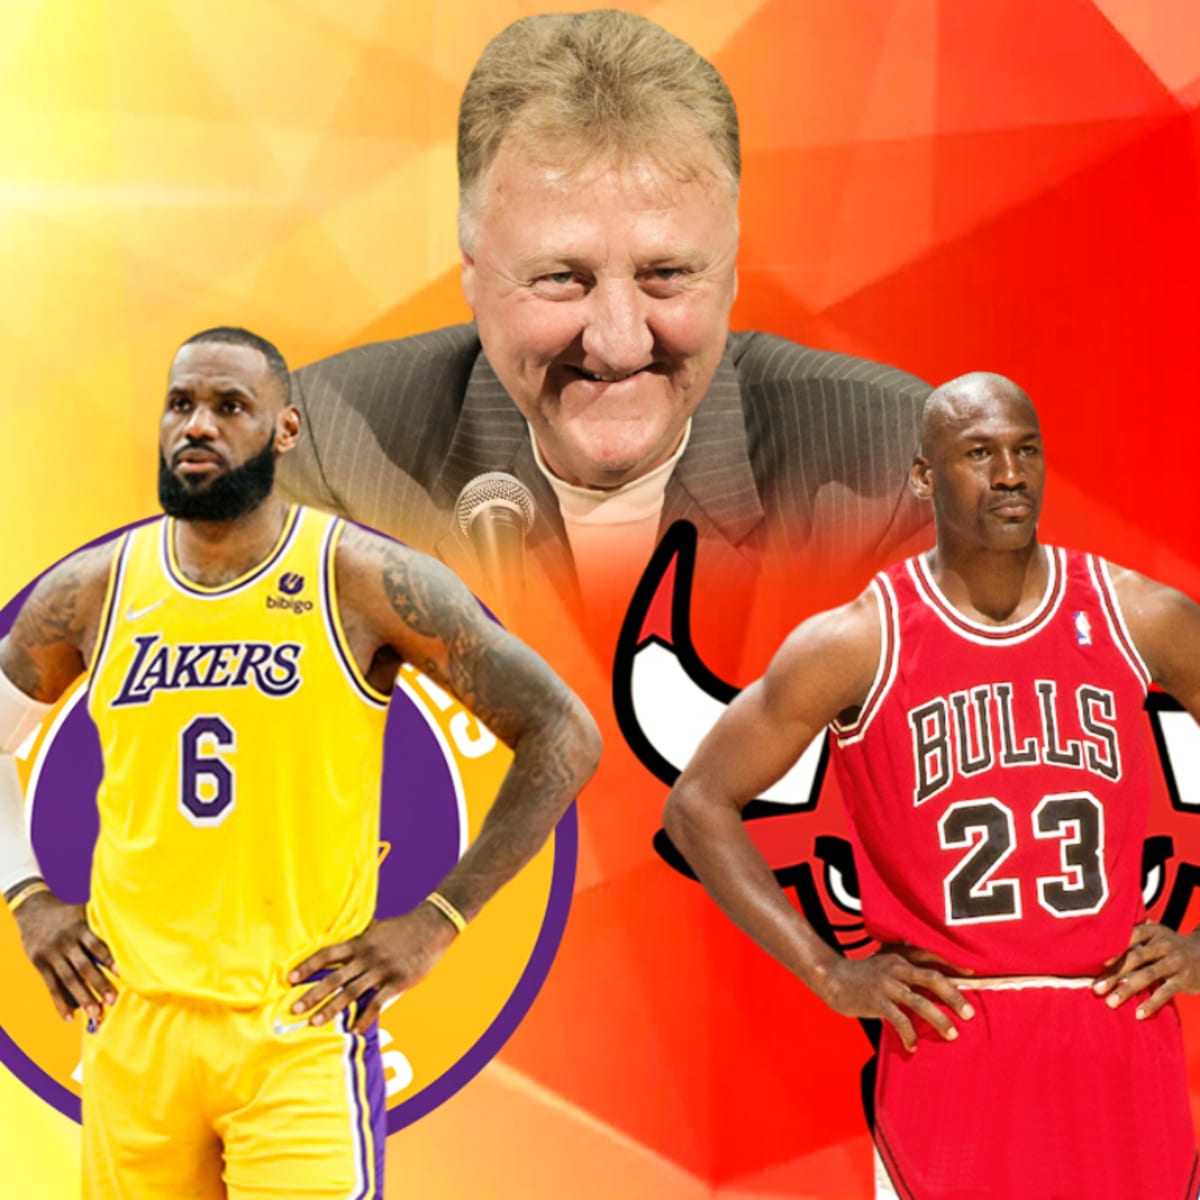 Larry Bird vs LeBron James after 10 years in the league - Better comparison  than MJ? 